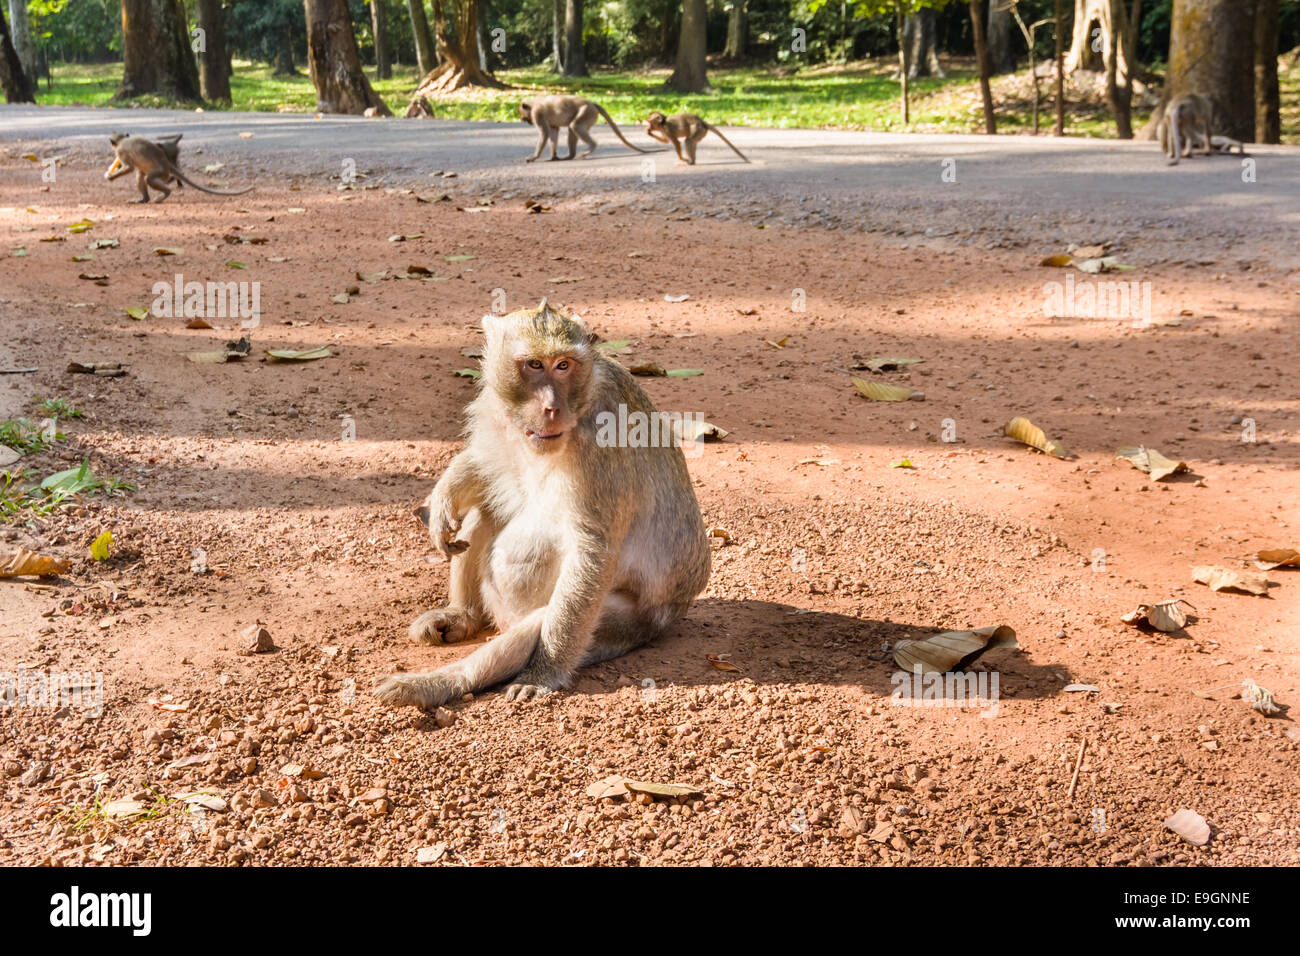 Temple Monkey in Angkor Wat World Heritage site, Siem Reap, Cambodia Stock Photo